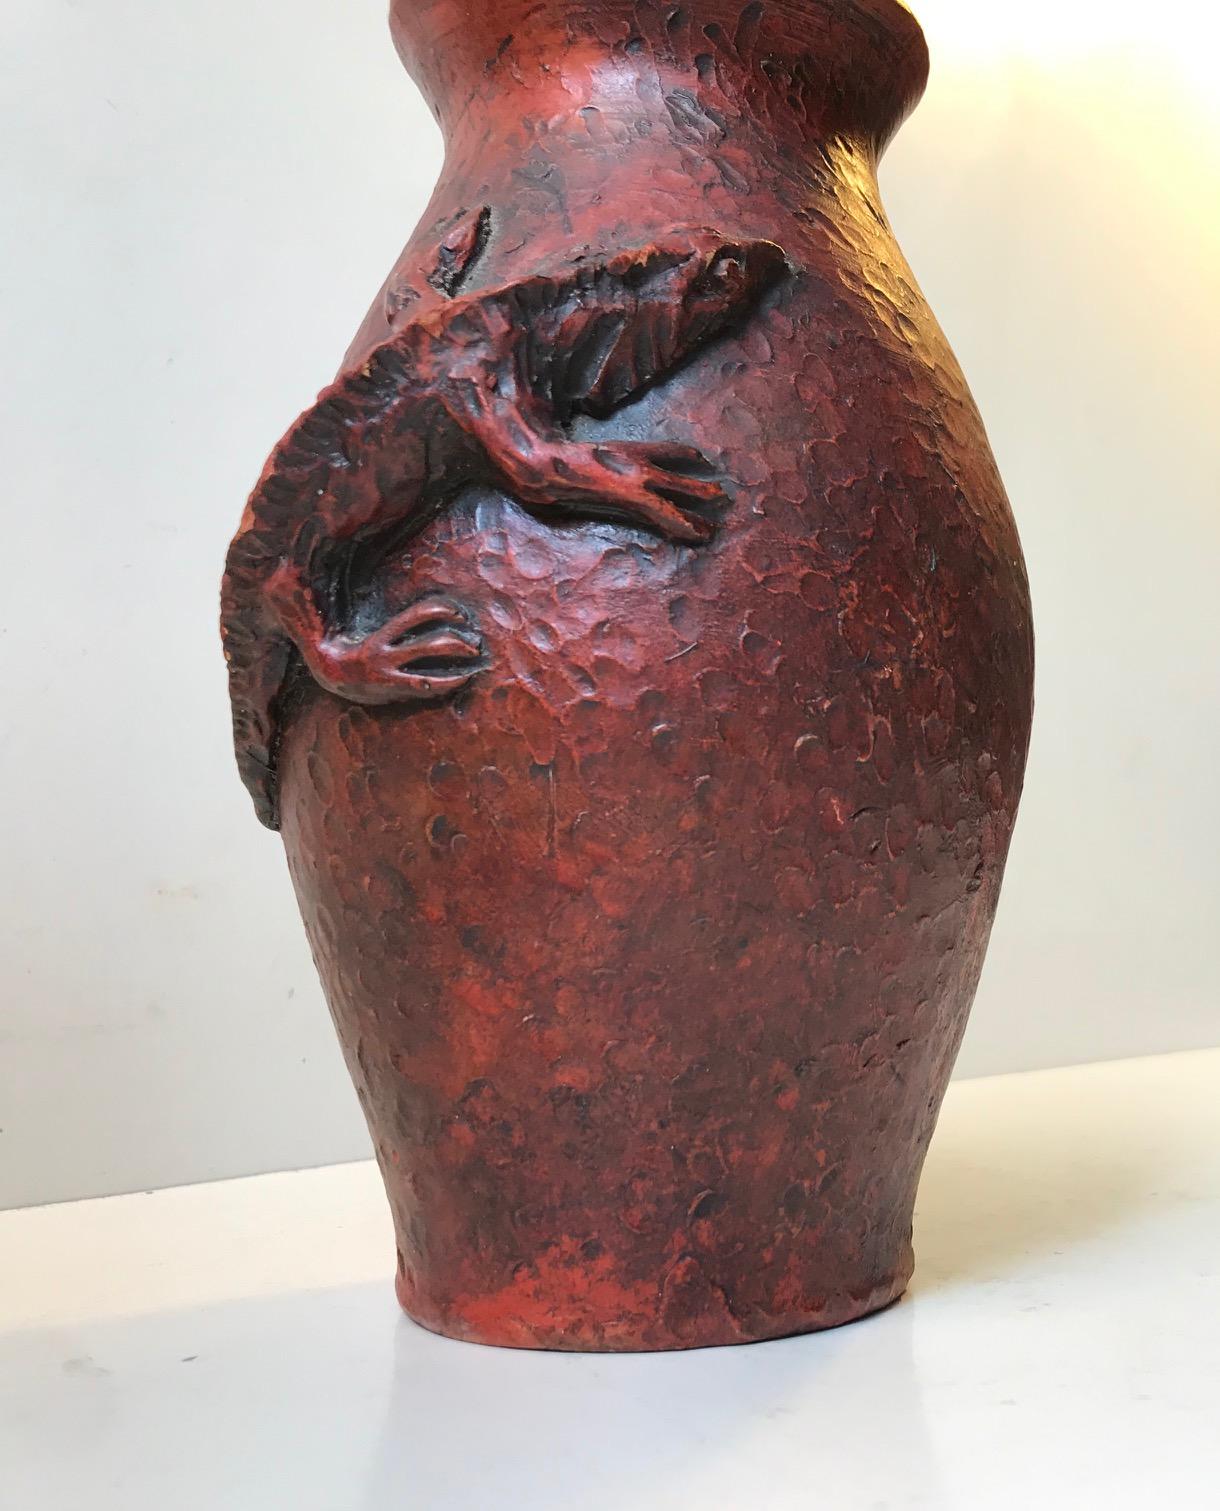 Unique red handprinted stoneware vase with lizard in relief. Its has a modern expression about it that flirts with the stylistics of Art Nouveau and Art Deco. The style of this particular vase is reminiscent of works by the French master Edmond